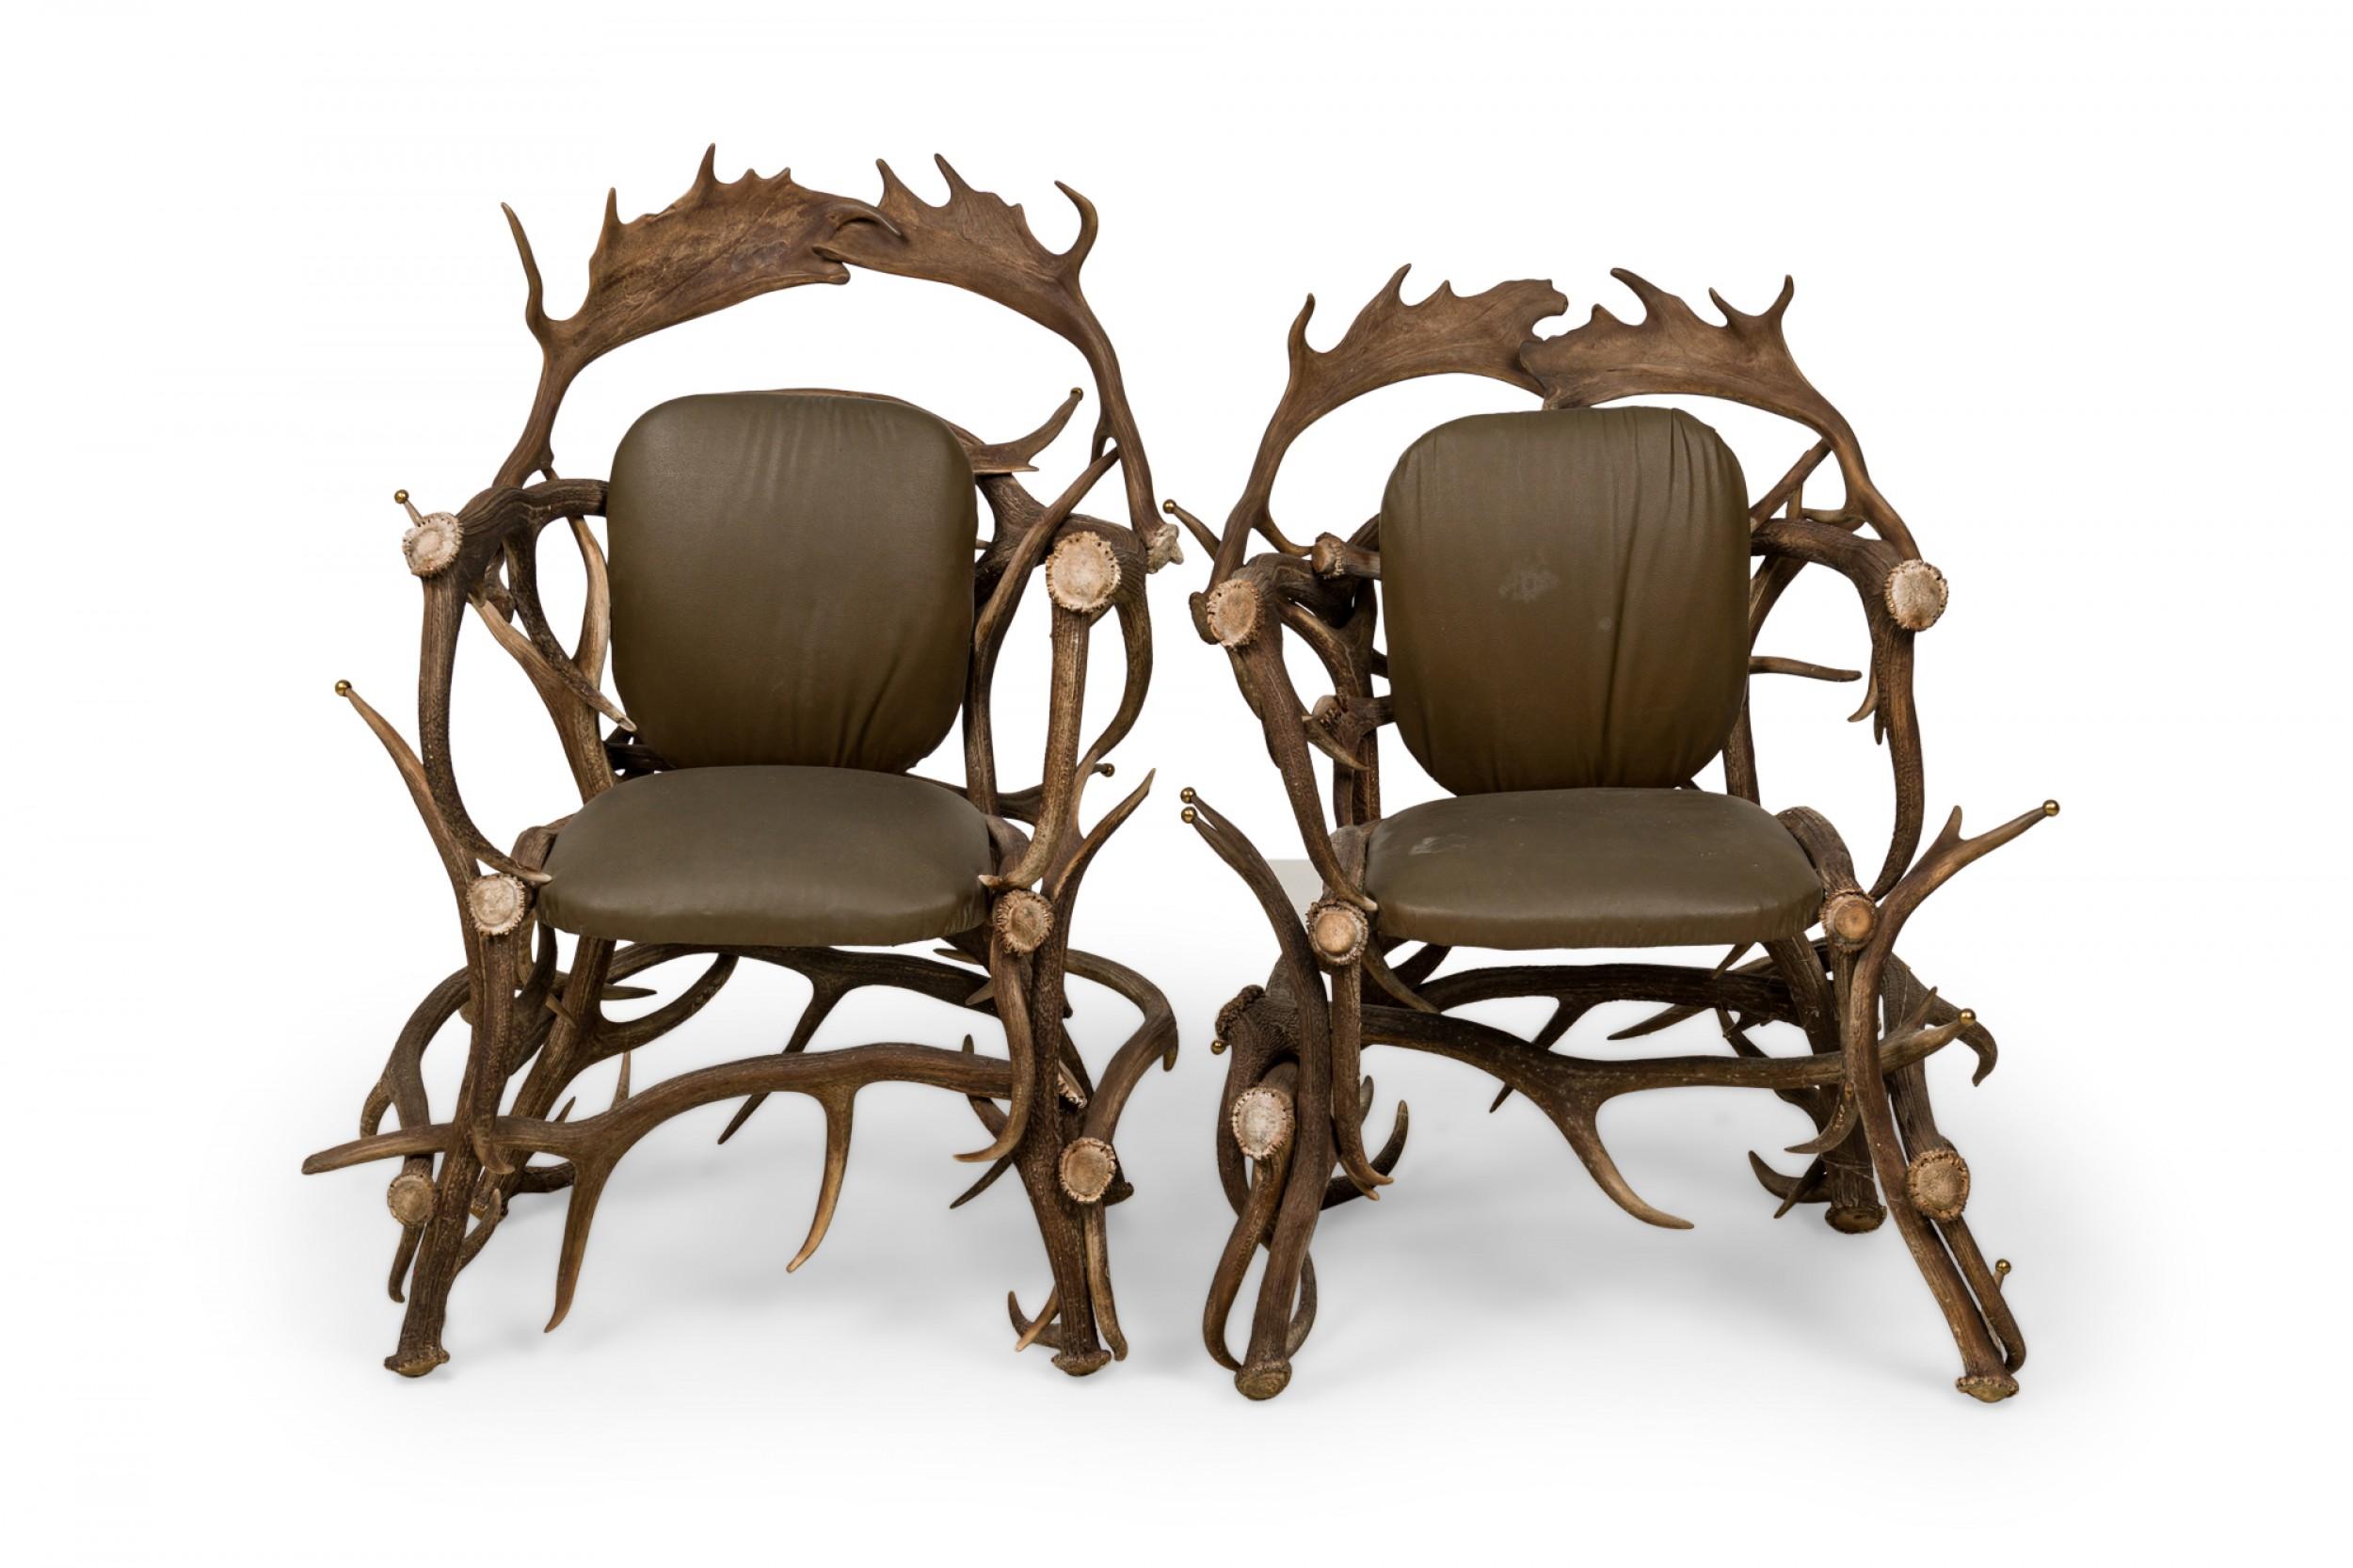 Pair of Rustic Continental-style armchairs with resin faux moose and deer antler constructed frame with points capped with decorative brass balls, and dark olive green upholstered seats and backs. (Priced as pair).